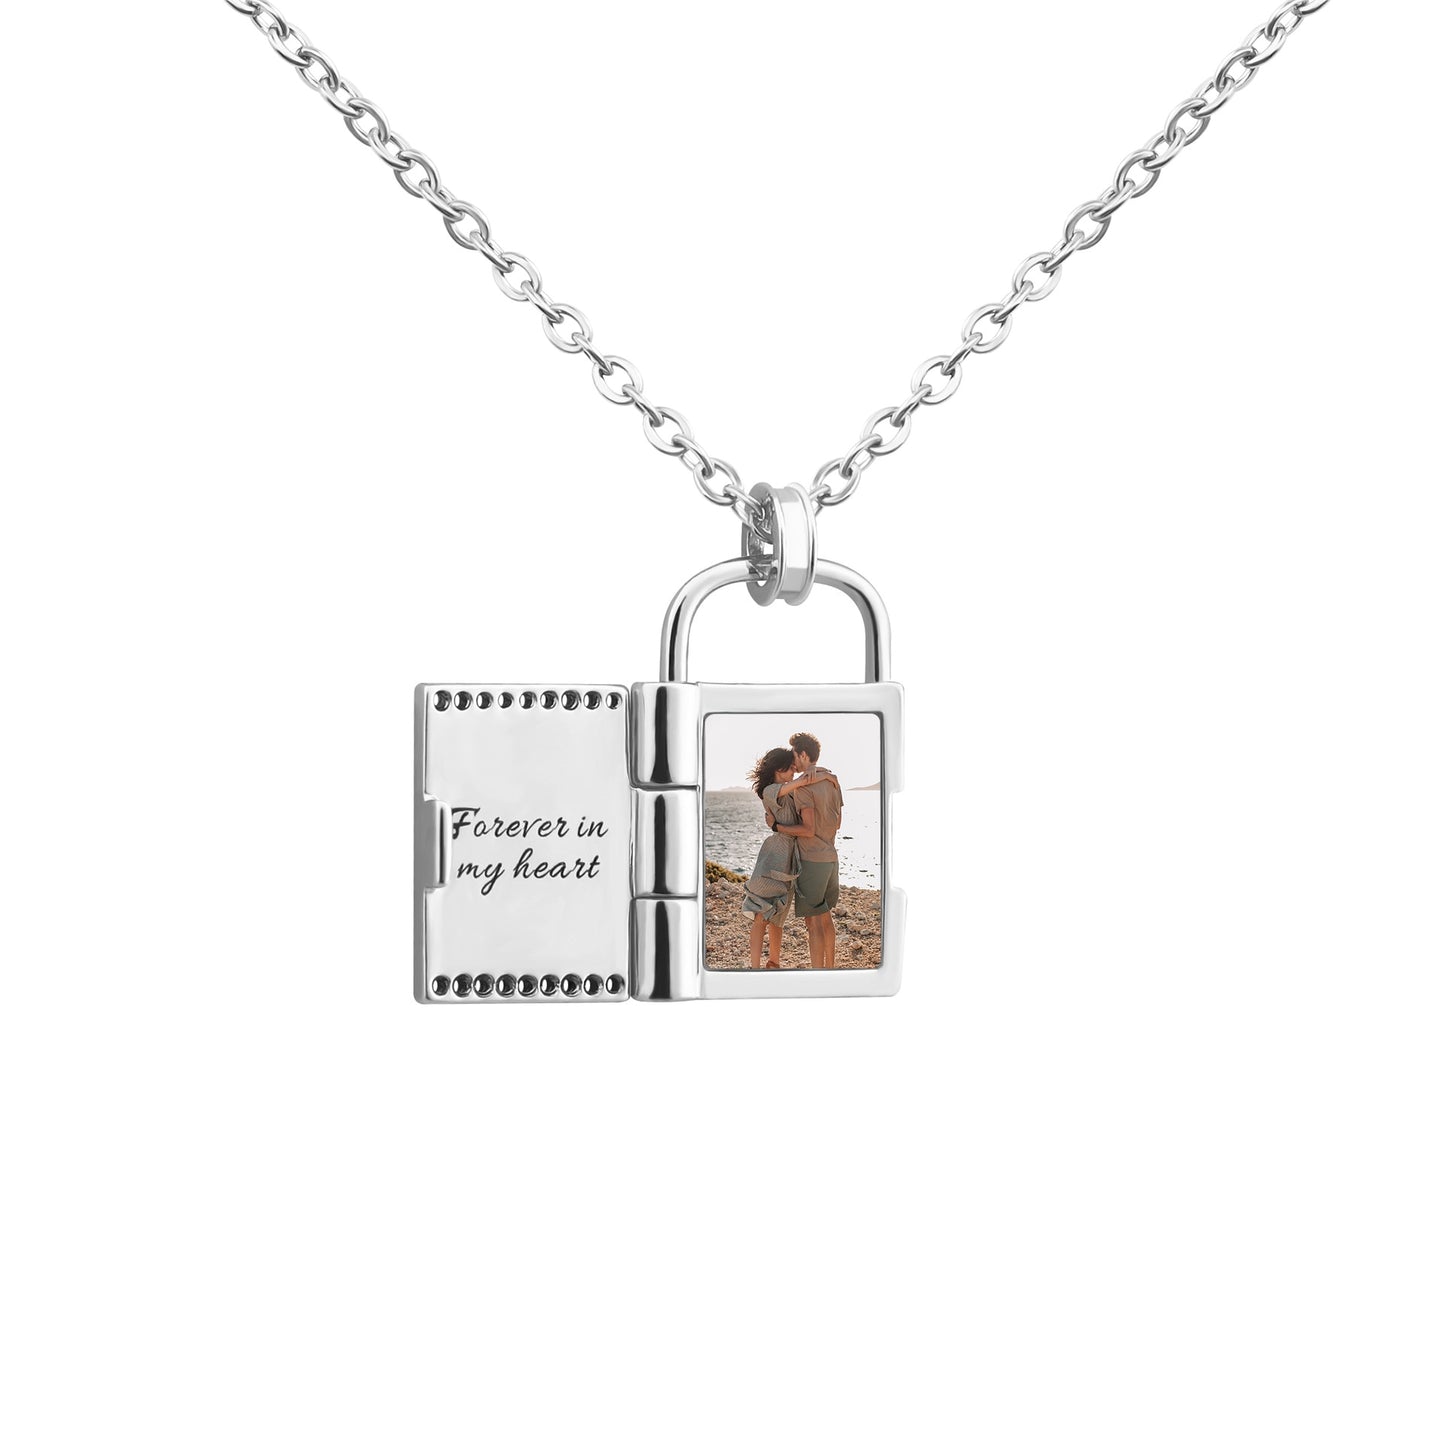 Photo Envelope Necklace with  Personalized Engraved message, Photo necklace